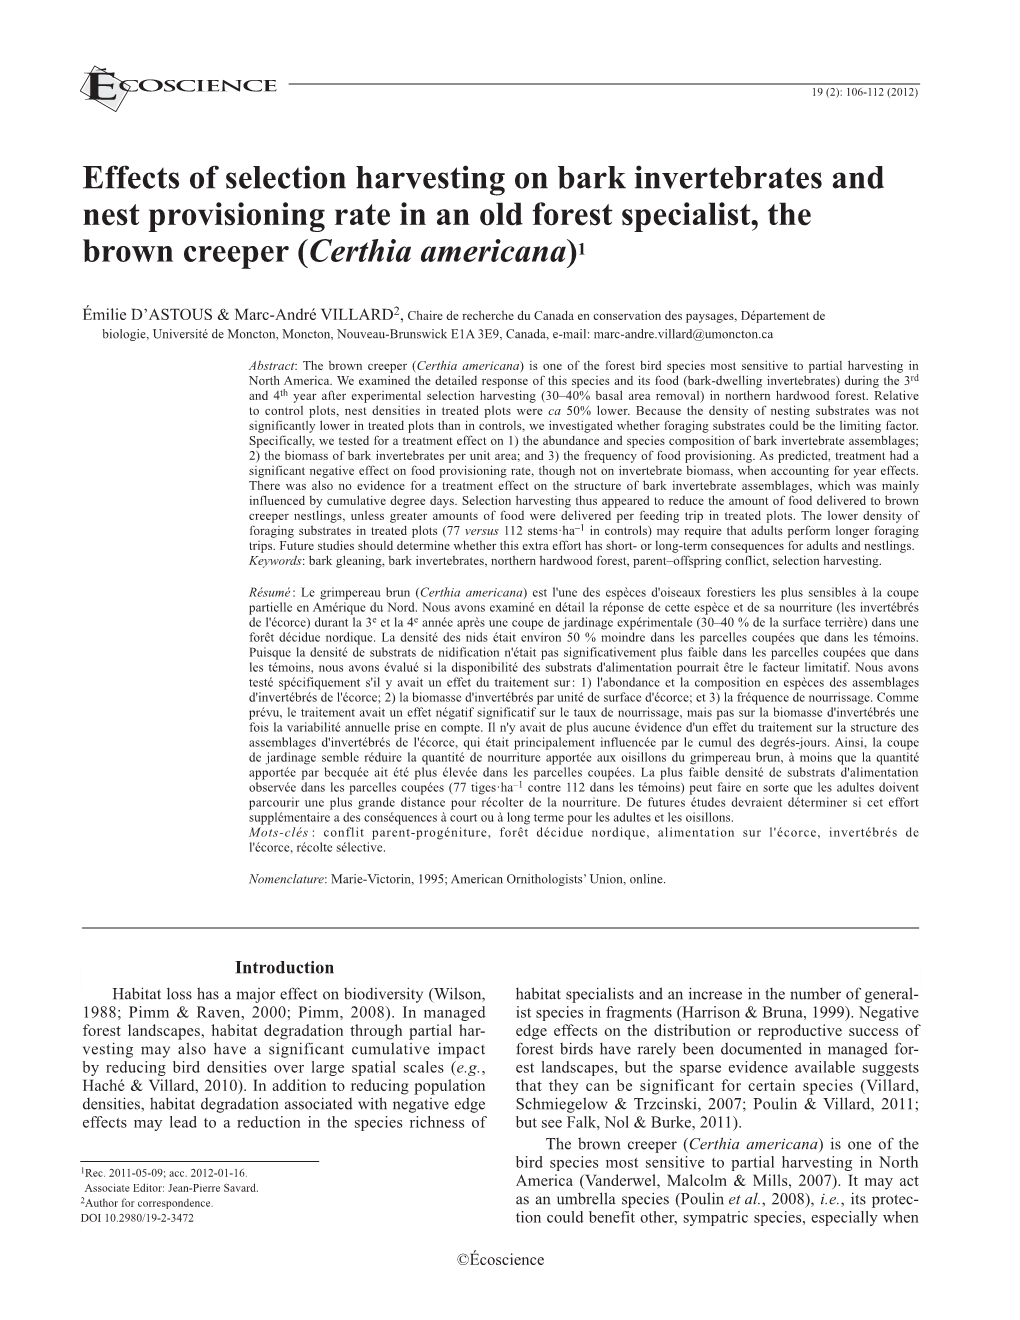 Effects of Selection Harvesting on Bark Invertebrates and Nest Provisioning Rate in an Old Forest Specialist, the Brown Creeper (Certhia Americana)1